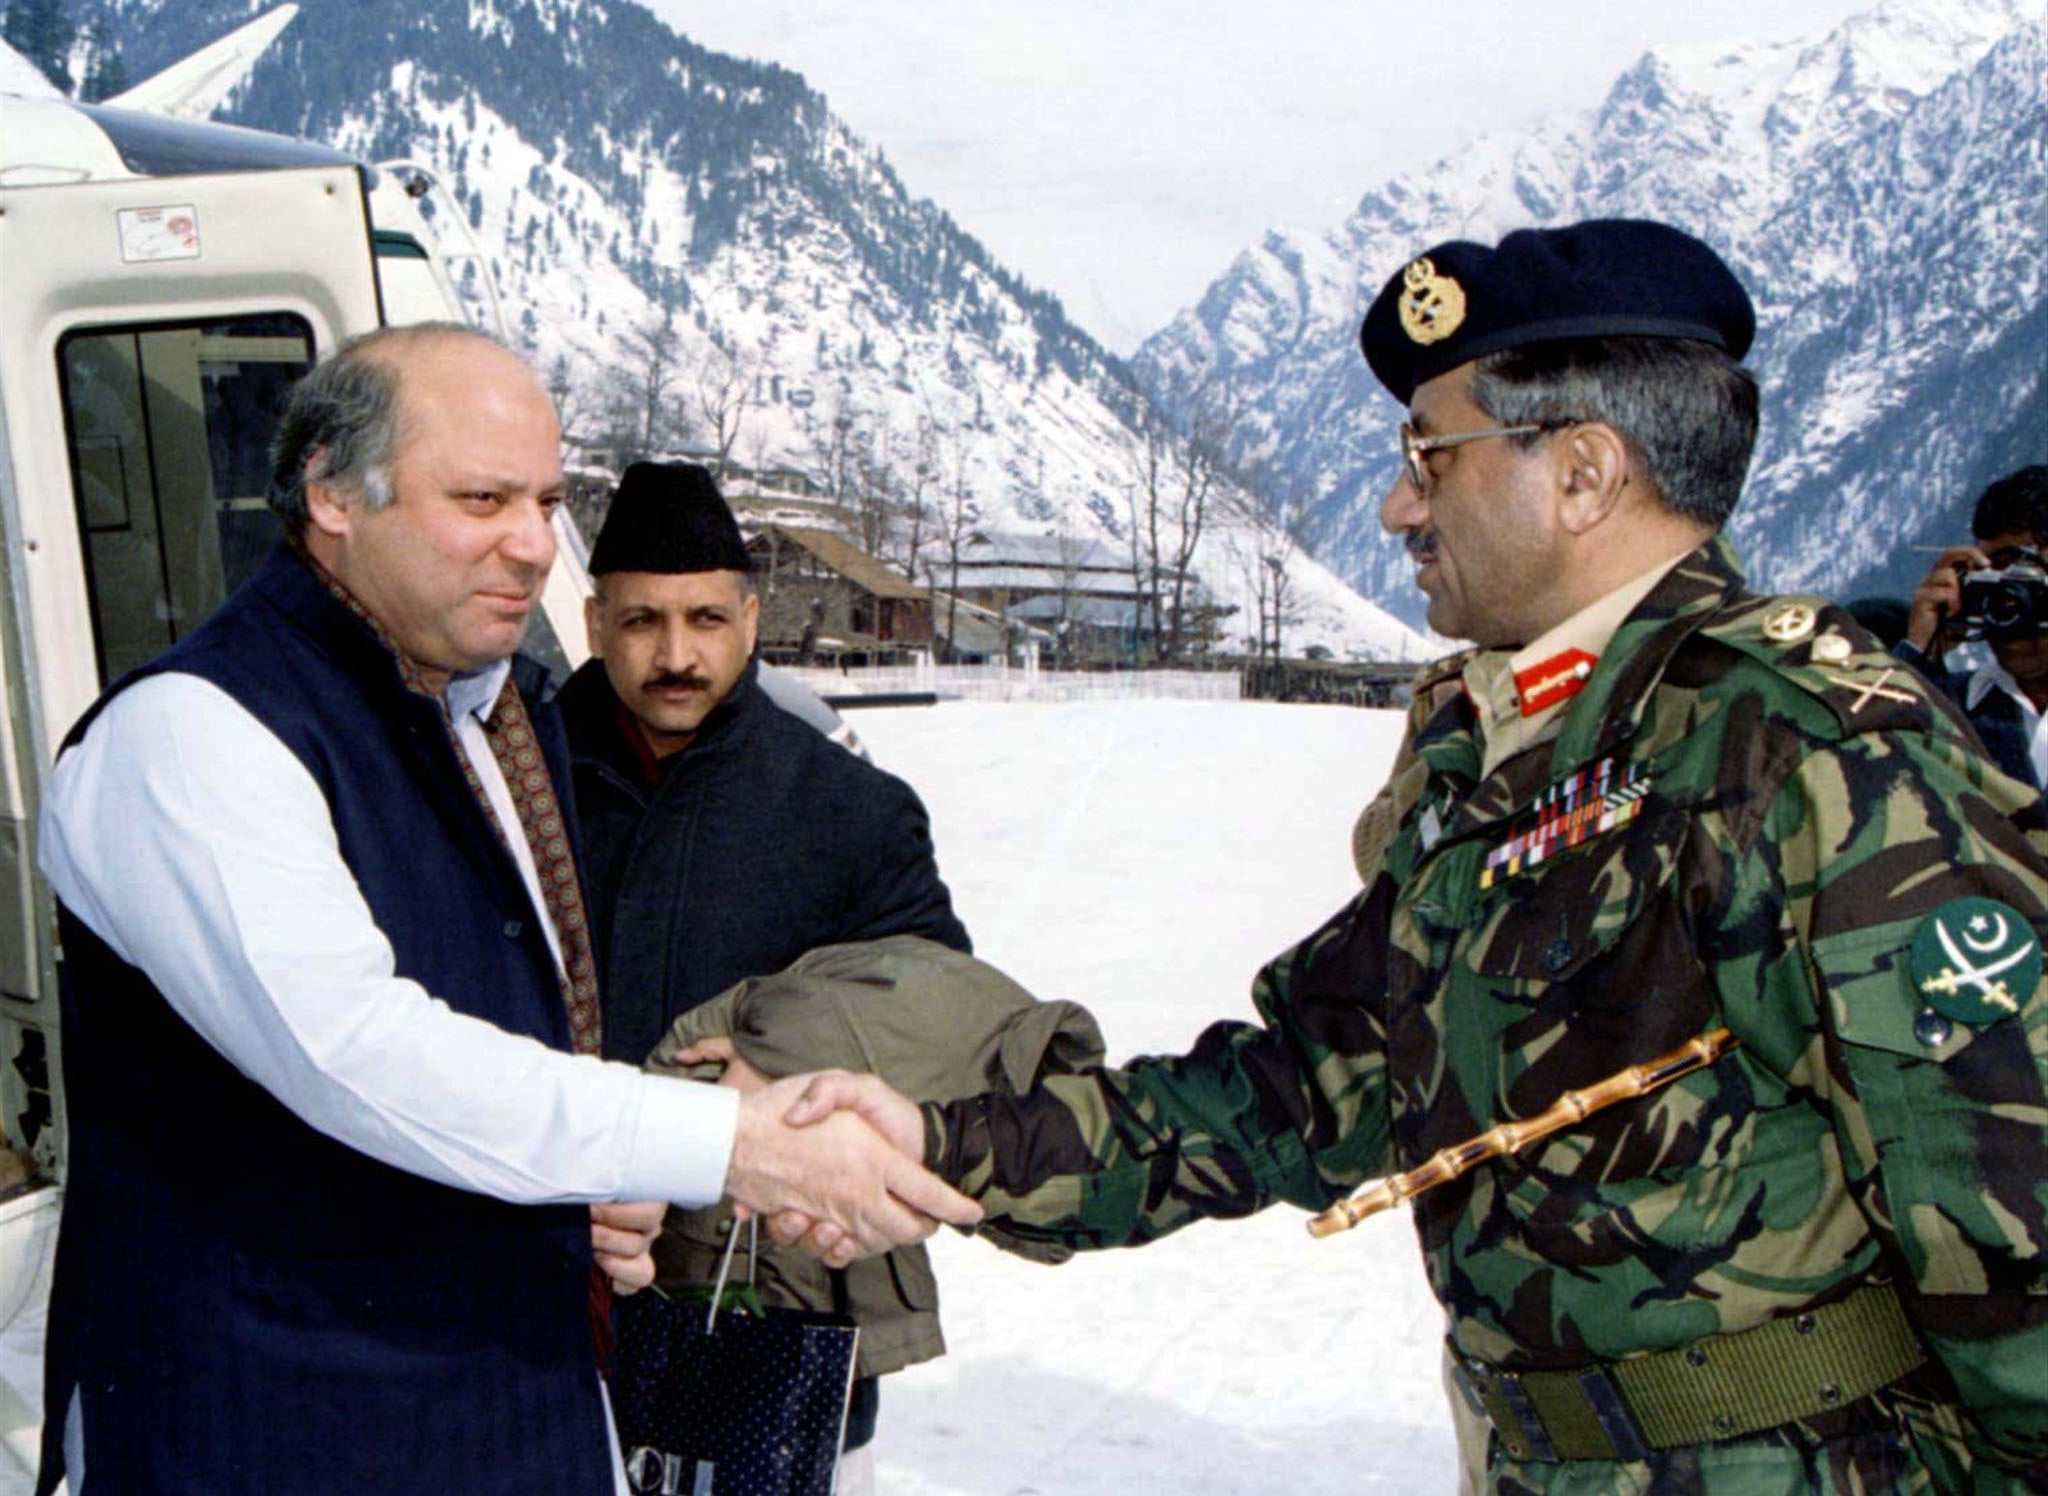 Prime Minister Nawaz Sharif is greeted by army chief General Pervez Musharraf on arrival at the snow-clad town of Kail on the border in the disputed Himalayan region of Kashmir in this February 5, 1999 file photo. — Reuters